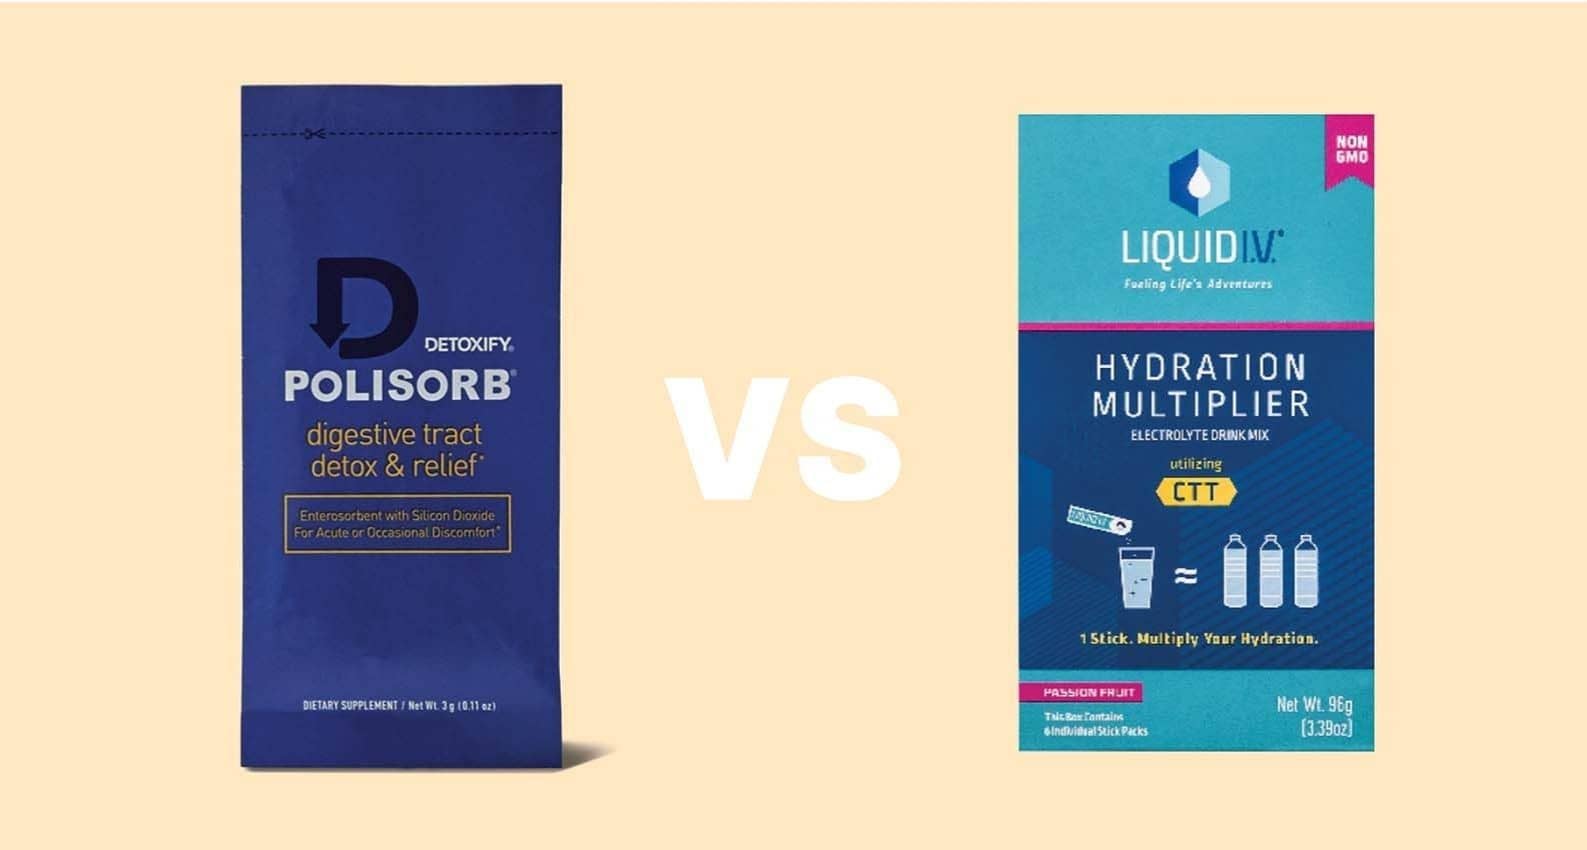 Polisorb vs Liquid IV for Hangover Relief: Which Should I Choose?